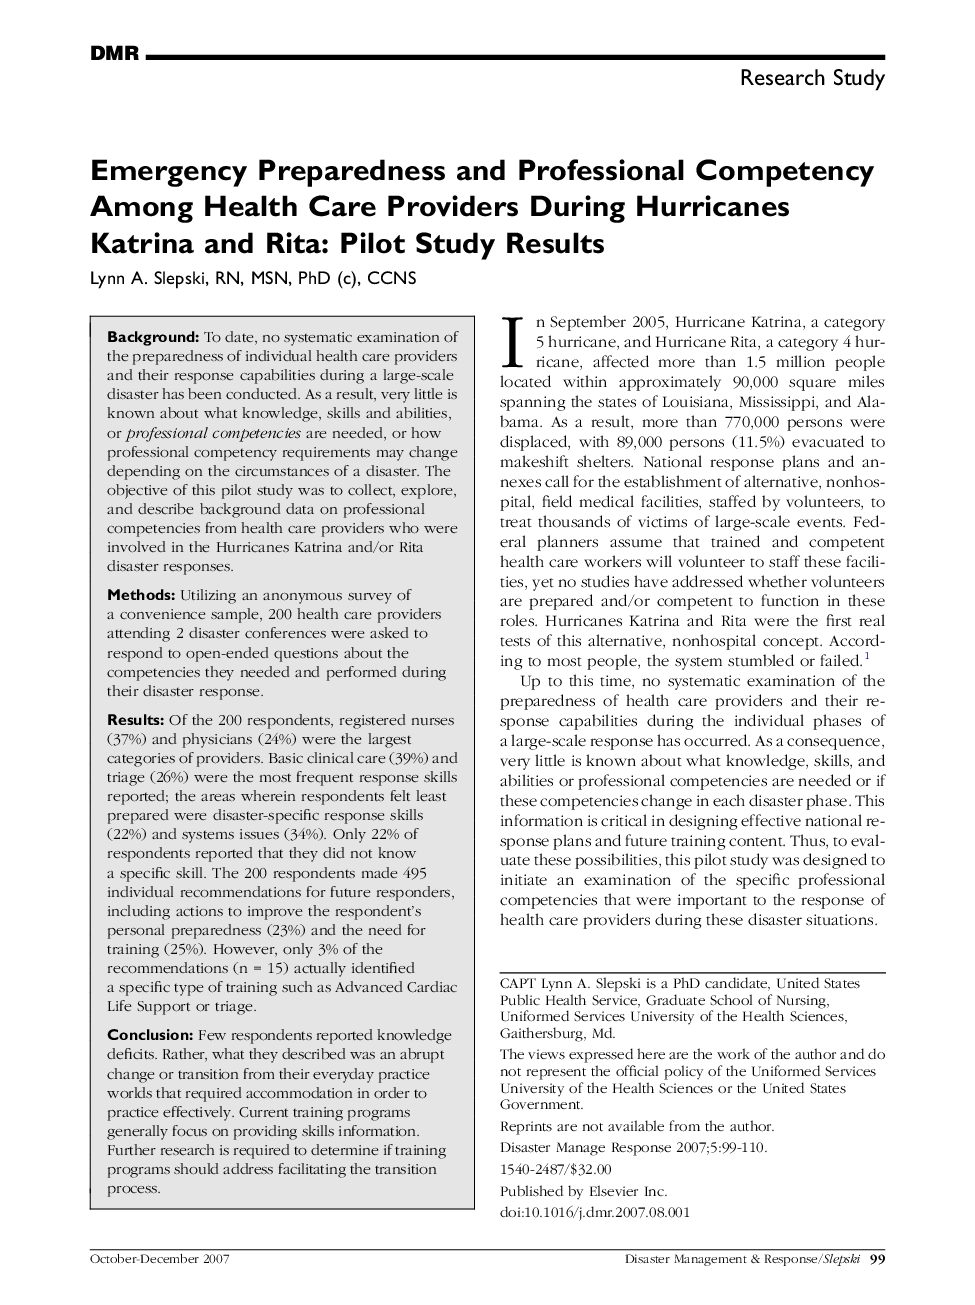 Emergency Preparedness and Professional Competency Among Health Care Providers During Hurricanes Katrina and Rita: Pilot Study Results 